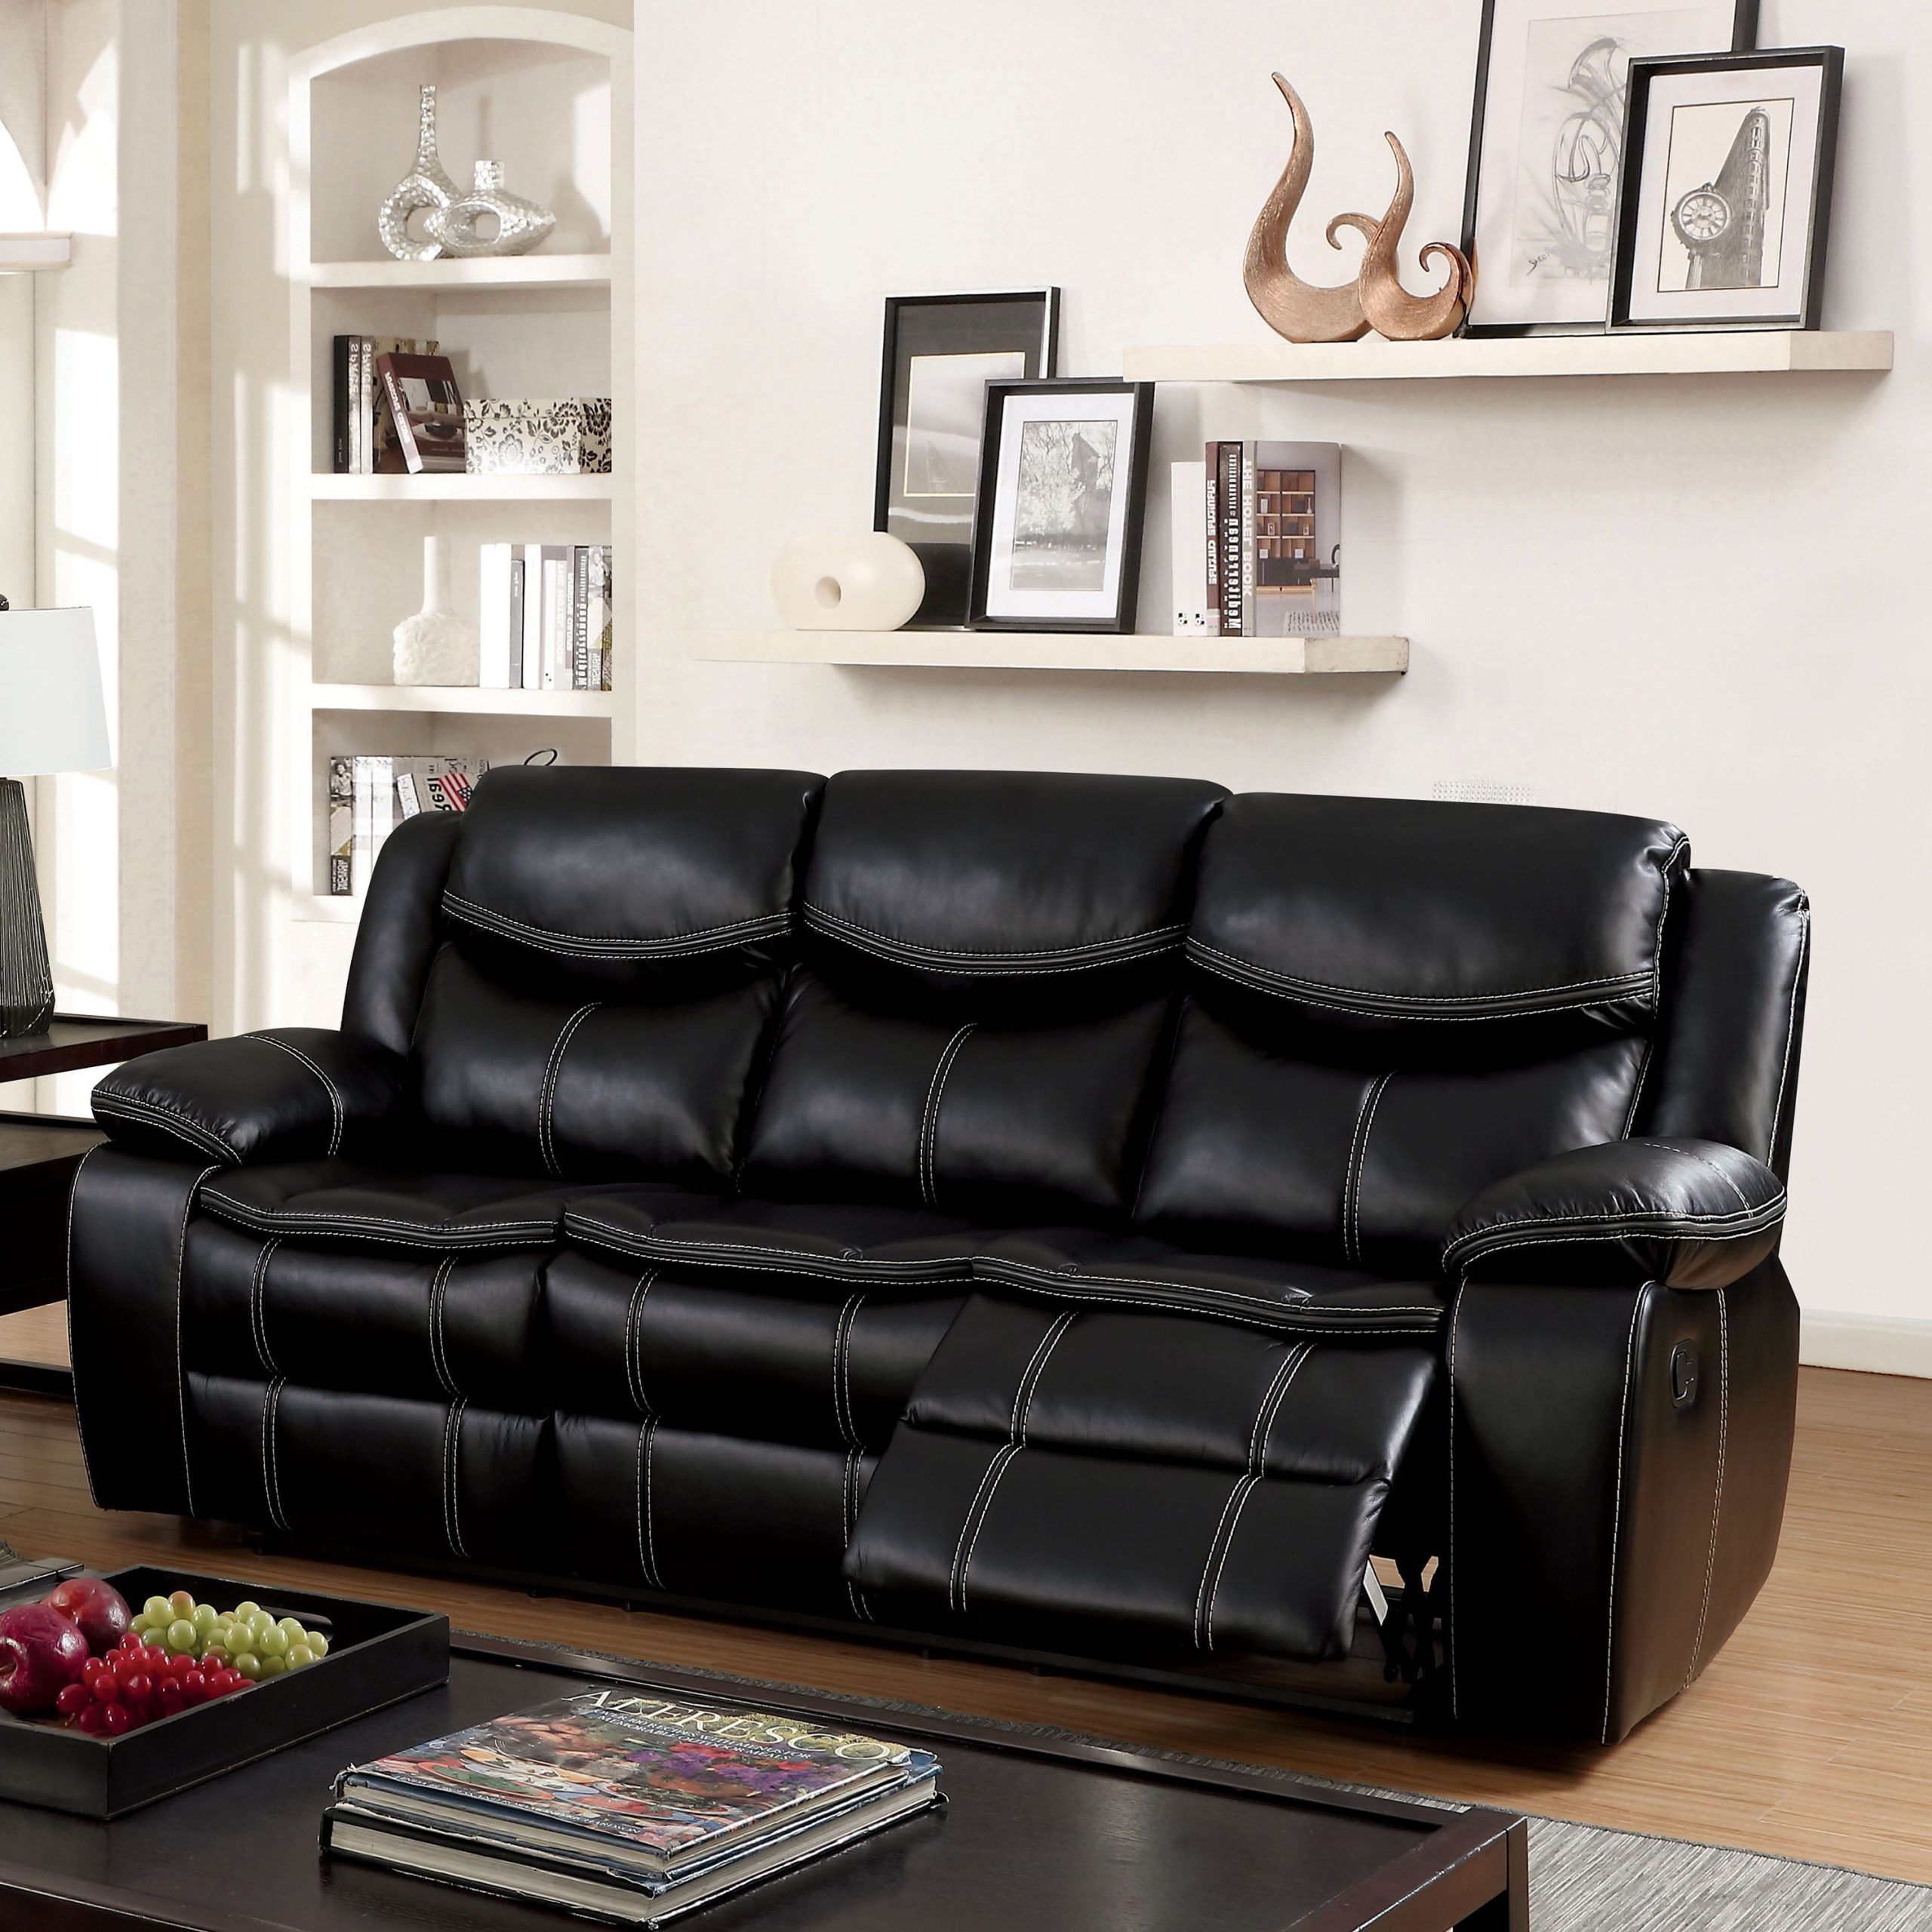 Furniture Of America Transitional Faux Leather Judson Reclining Sofa Pertaining To Sofas In Black (Gallery 17 of 20)